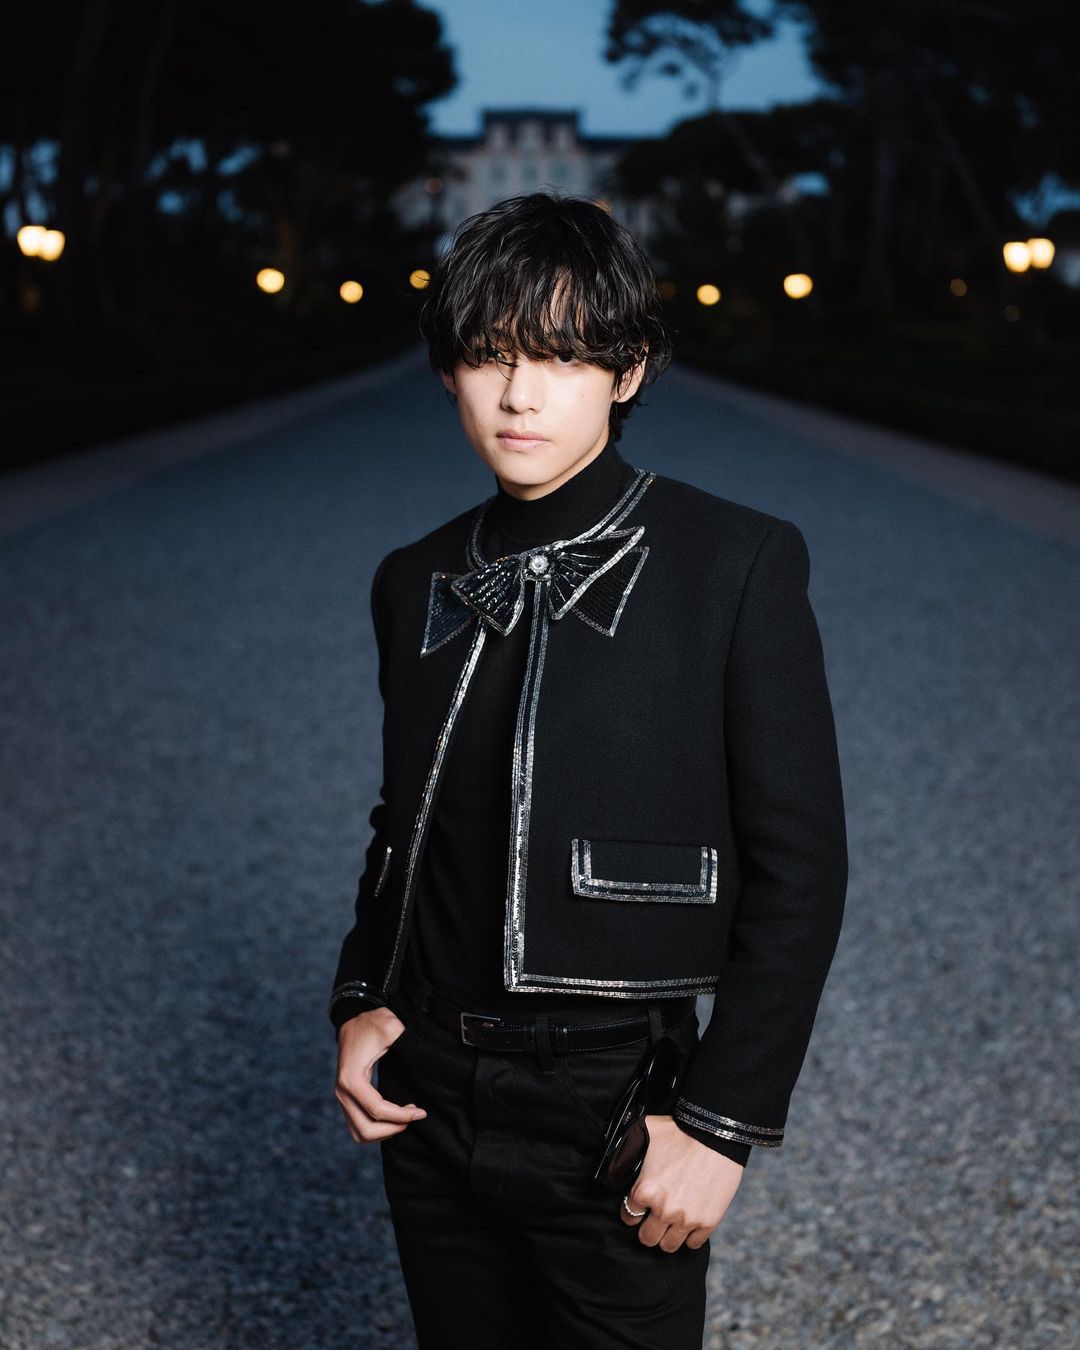 INFO] @louisvuitton updated an Instagram post welcoming BTS V as